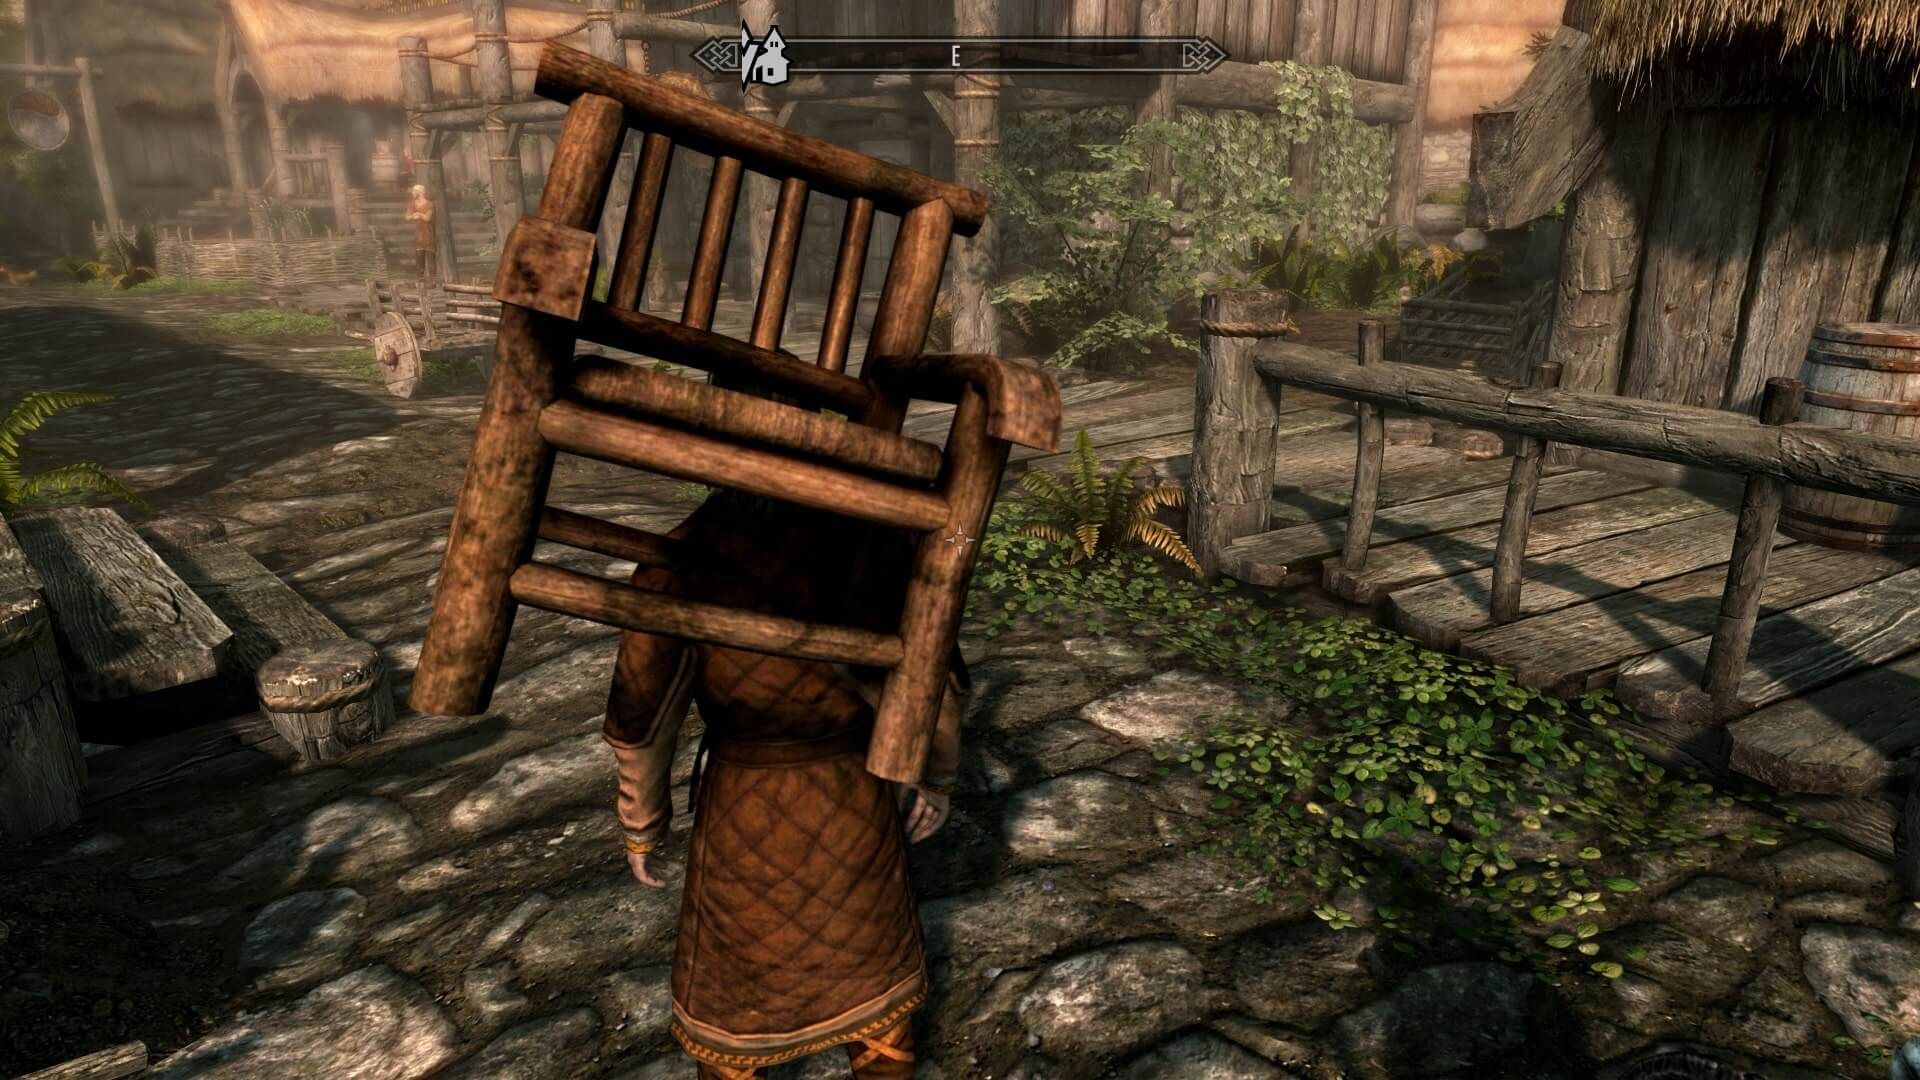 Skyrim Mod Turns Furniture Into Deadly Two-Handed Weapon